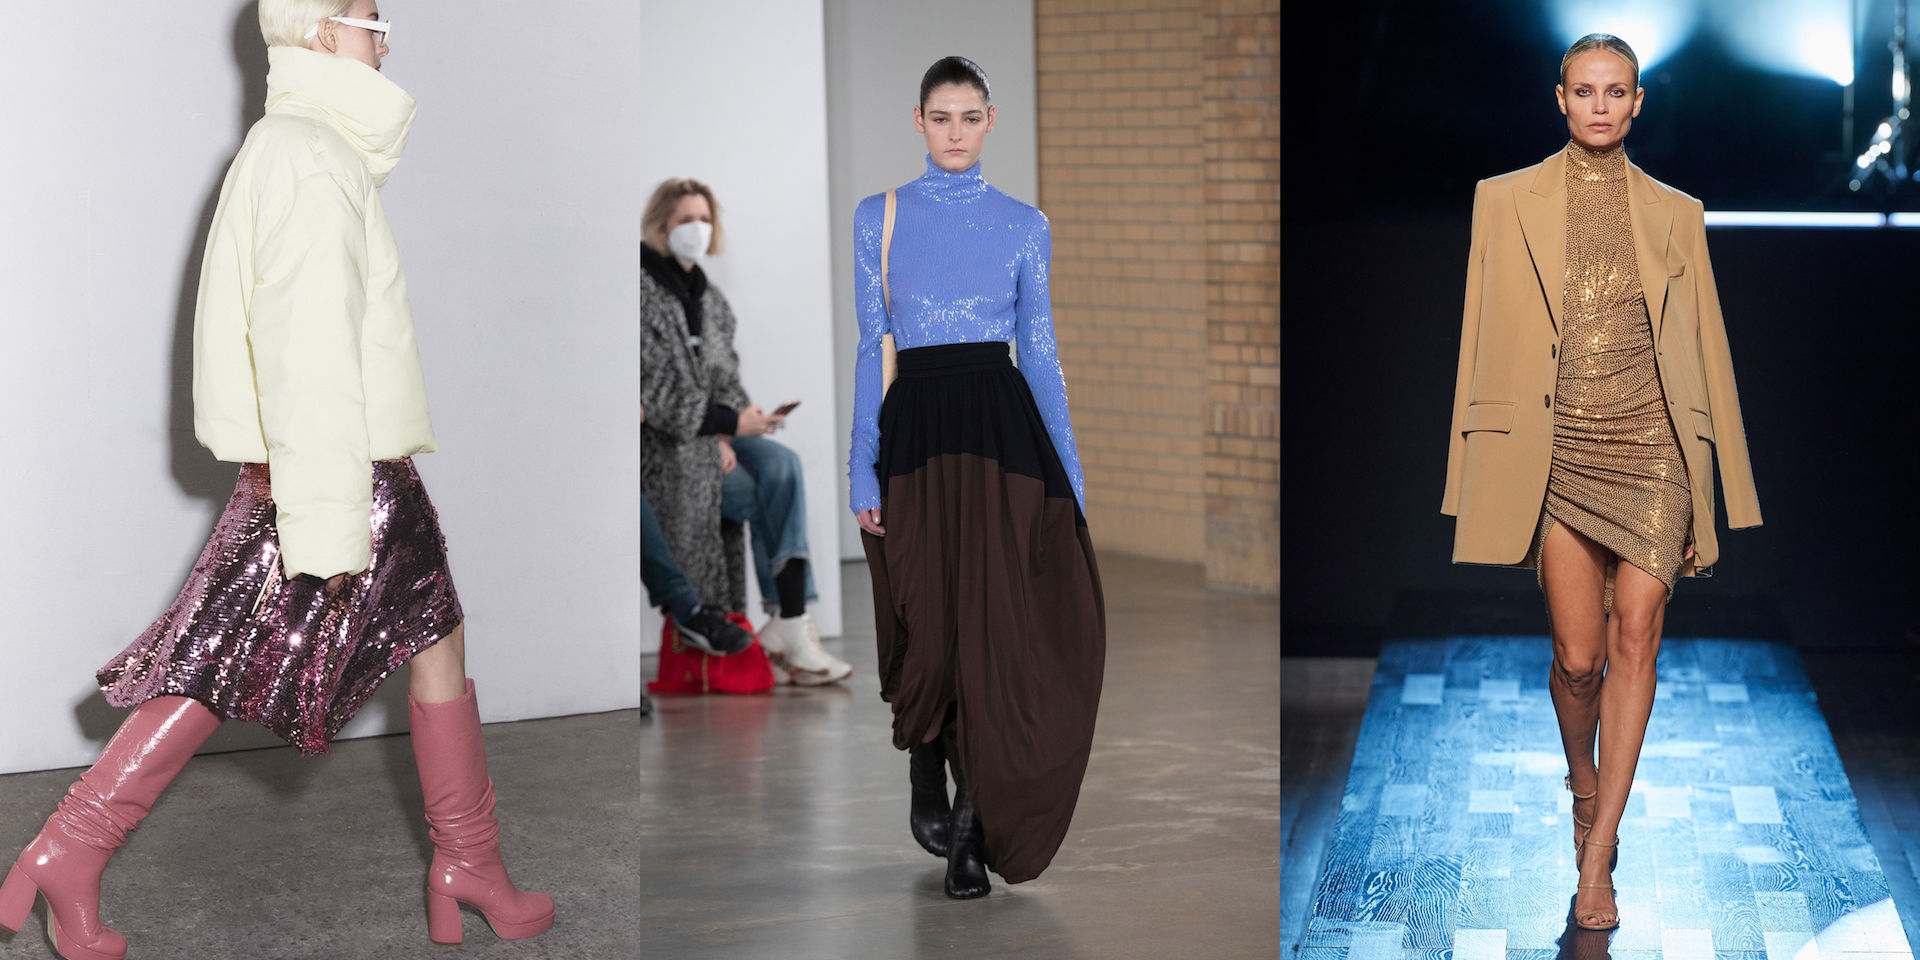 FW19 Fashion Trend Report: The Best Women's Fashion Trends for